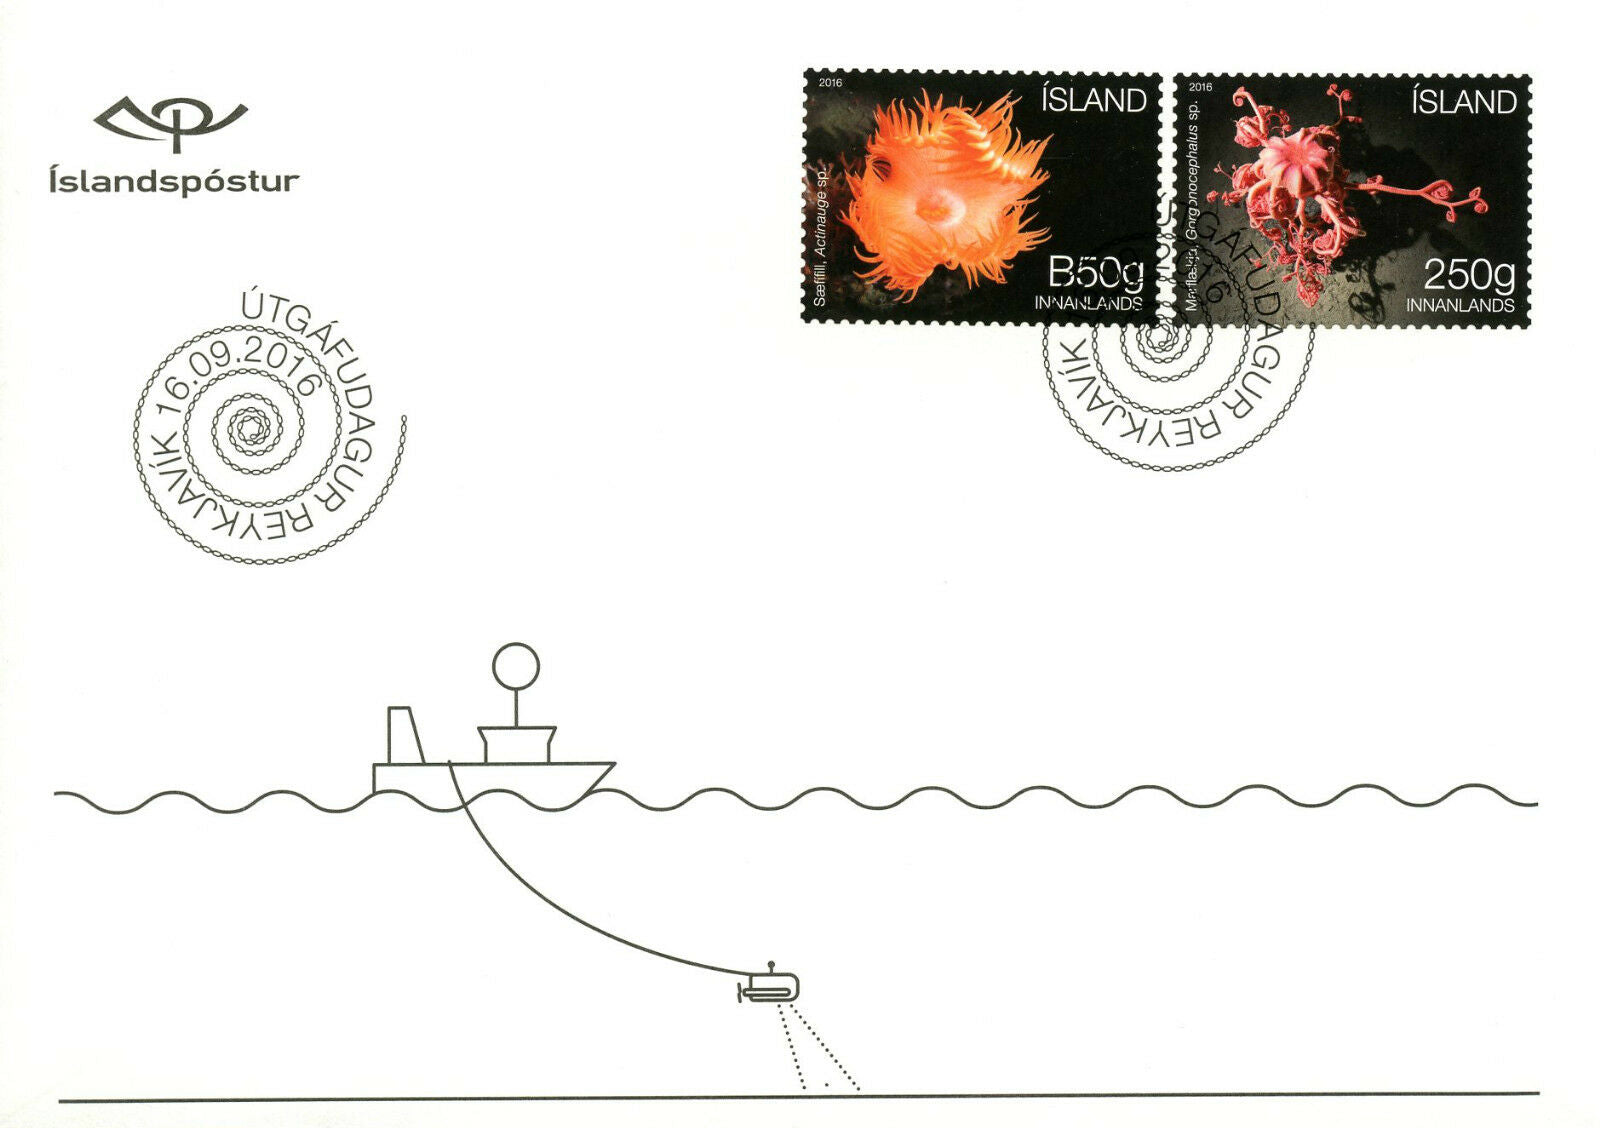 Iceland 2016 FDC Seabed Ecosystem 2v S/A Cover Sea Anemones Basket Star Stamps